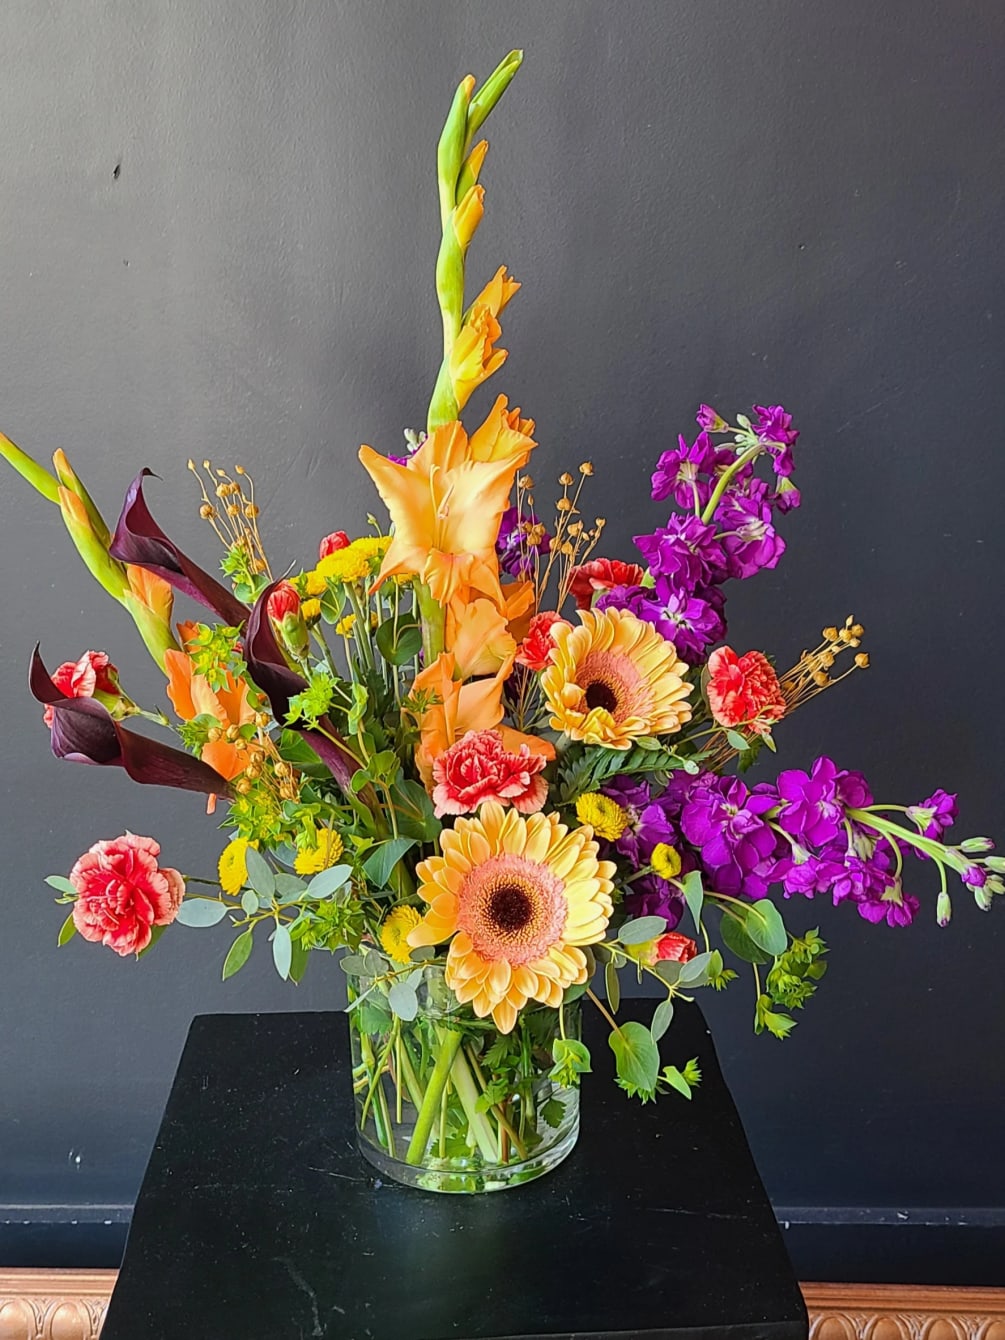 Knock their socks off with this colorful and creative arrangement of gerbs